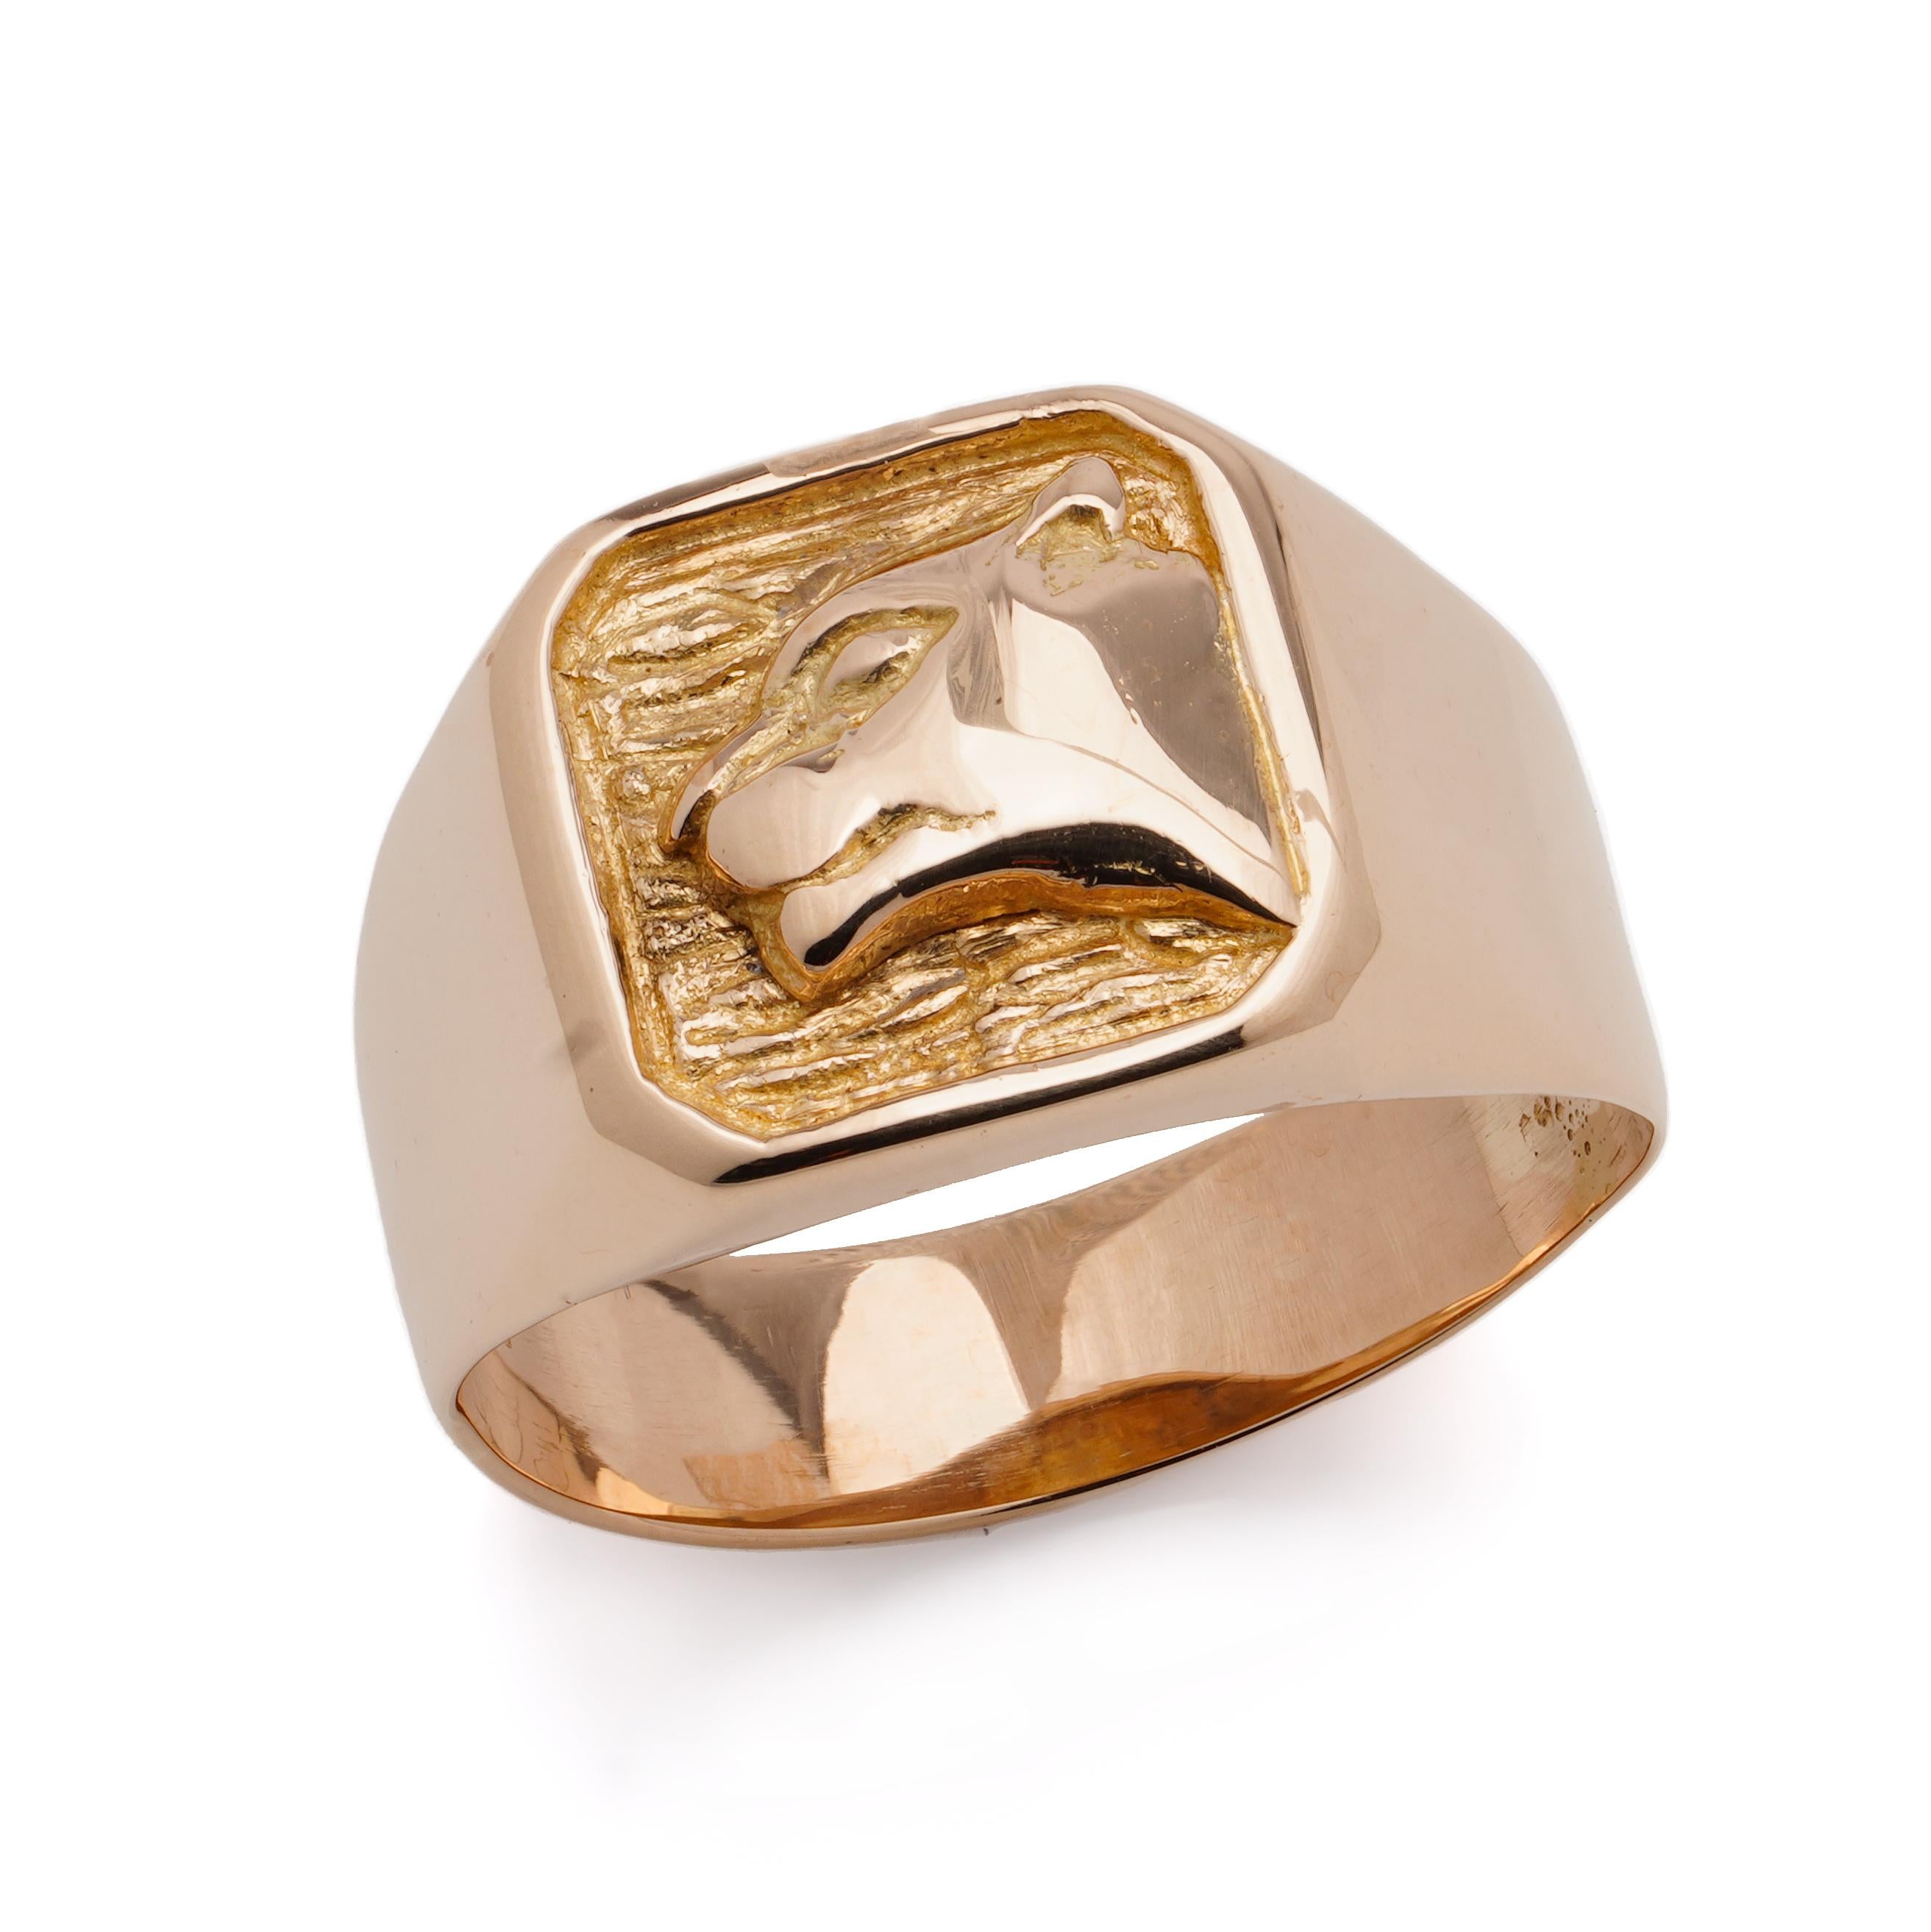 18kt. Yellow Gold extra large size men's Signet ring, featuring panther's head. 
Made after 2000. 
Hallmarked 750 ( 18kt. gold standard ) 

The dimensions - 
Finger Size (UK) = Z (EU) = 68 (US) = 12 1/2
Weight: 9.40 grams

Panthers in signet rings